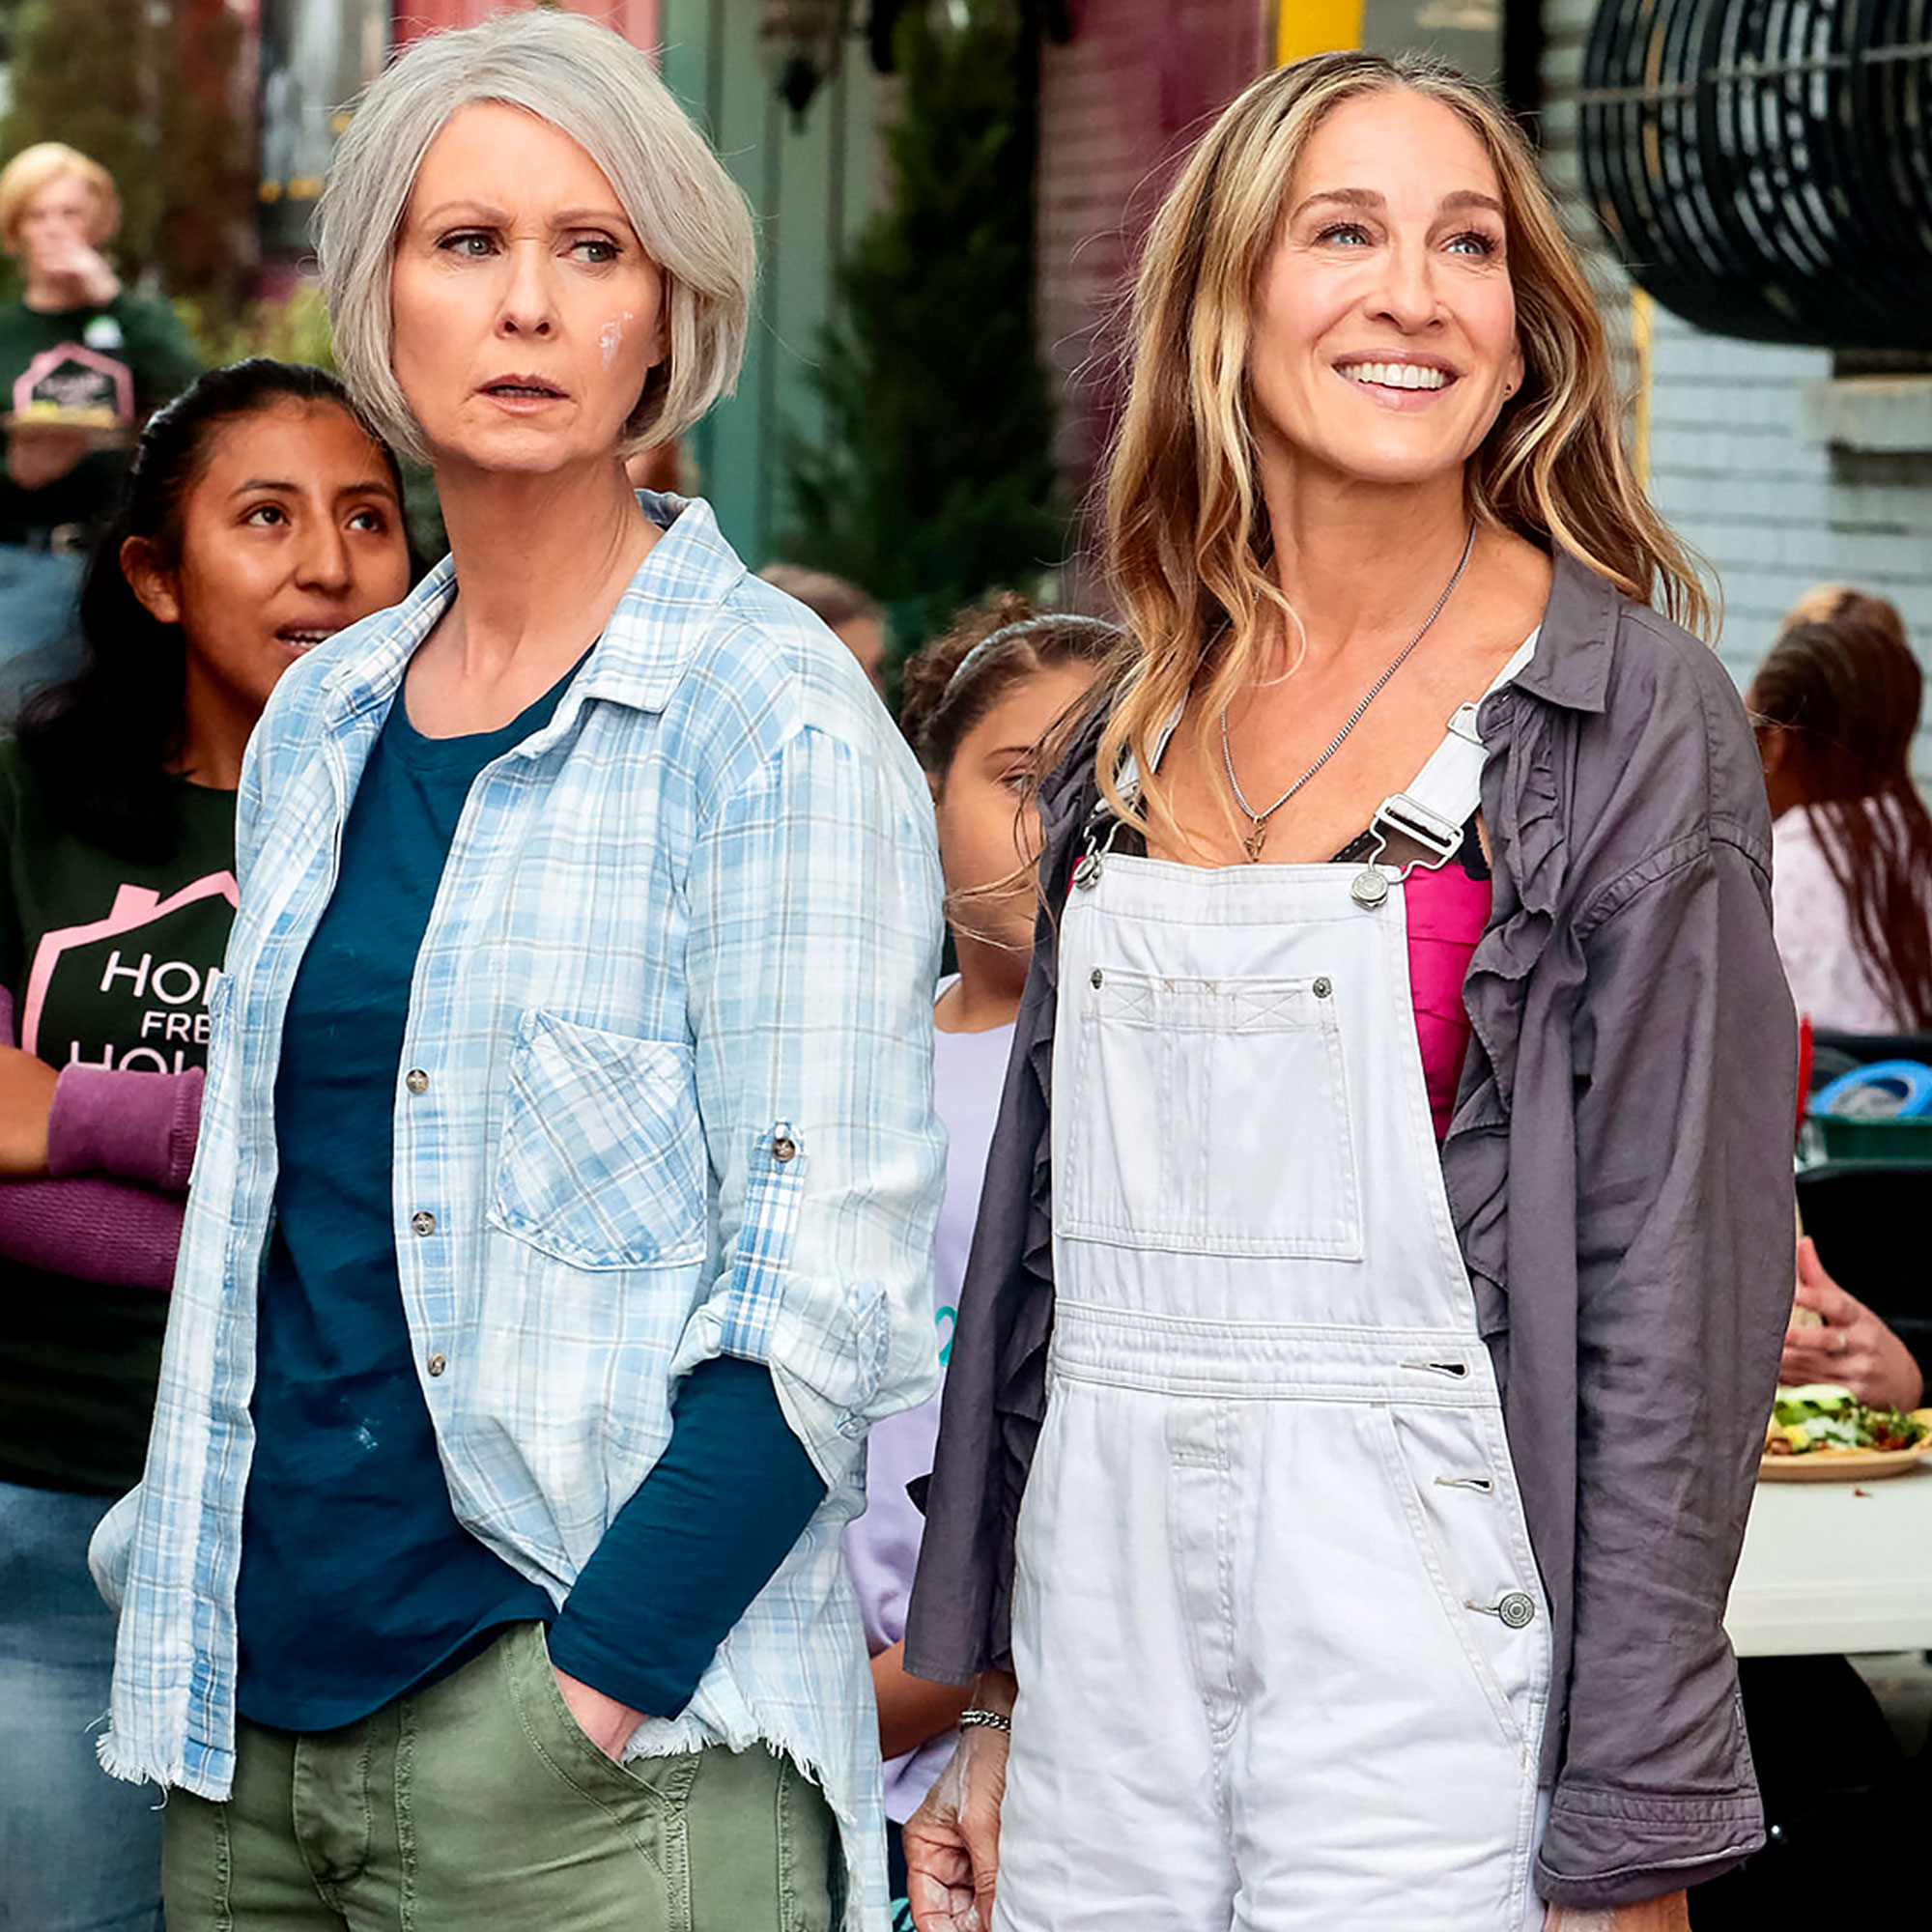 Sarah Jessica Parker's 'SATC' Fashion: 'And Just Like That' Looks